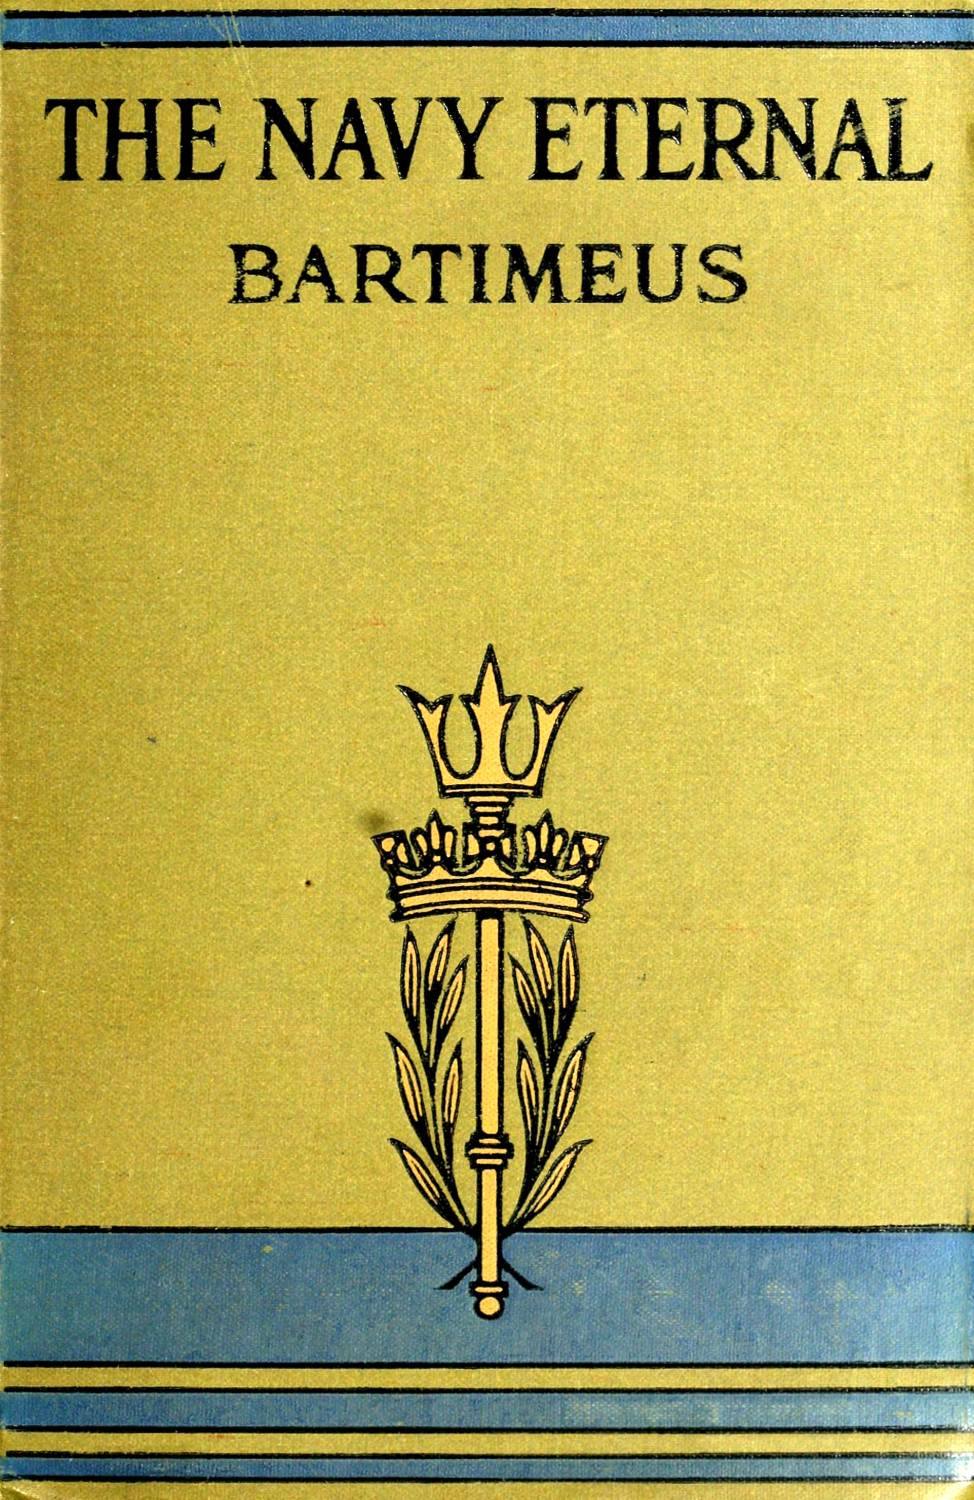 The Project Gutenberg eBook of The Navy eternal, by “Bartimeus”.